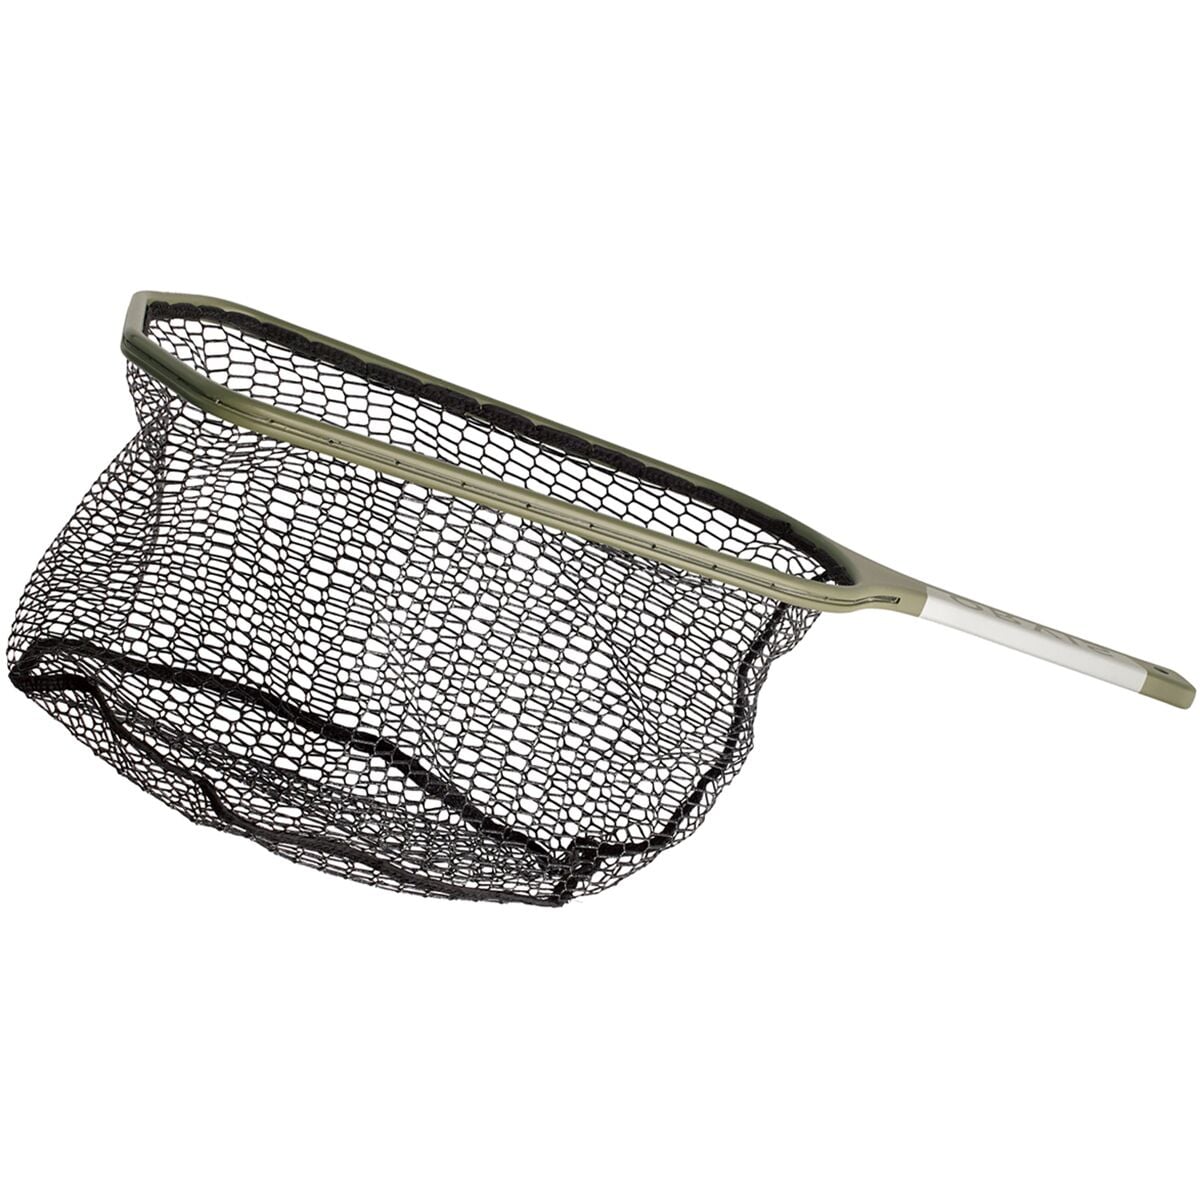 Orvis Wide Mouth Guide Net